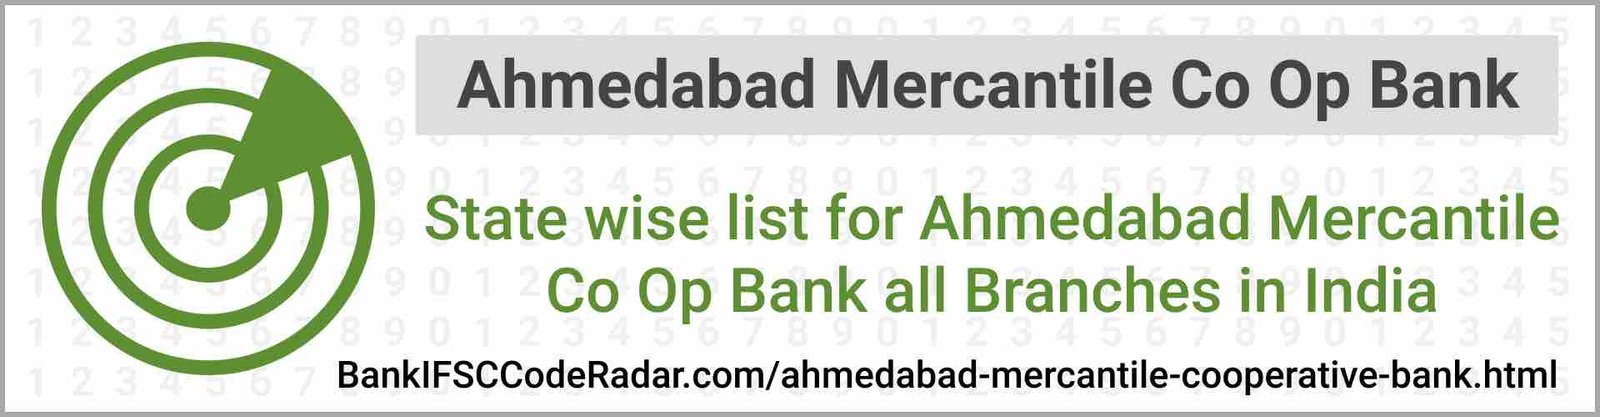 Ahmedabad Mercantile Cooperative Bank All Branches India